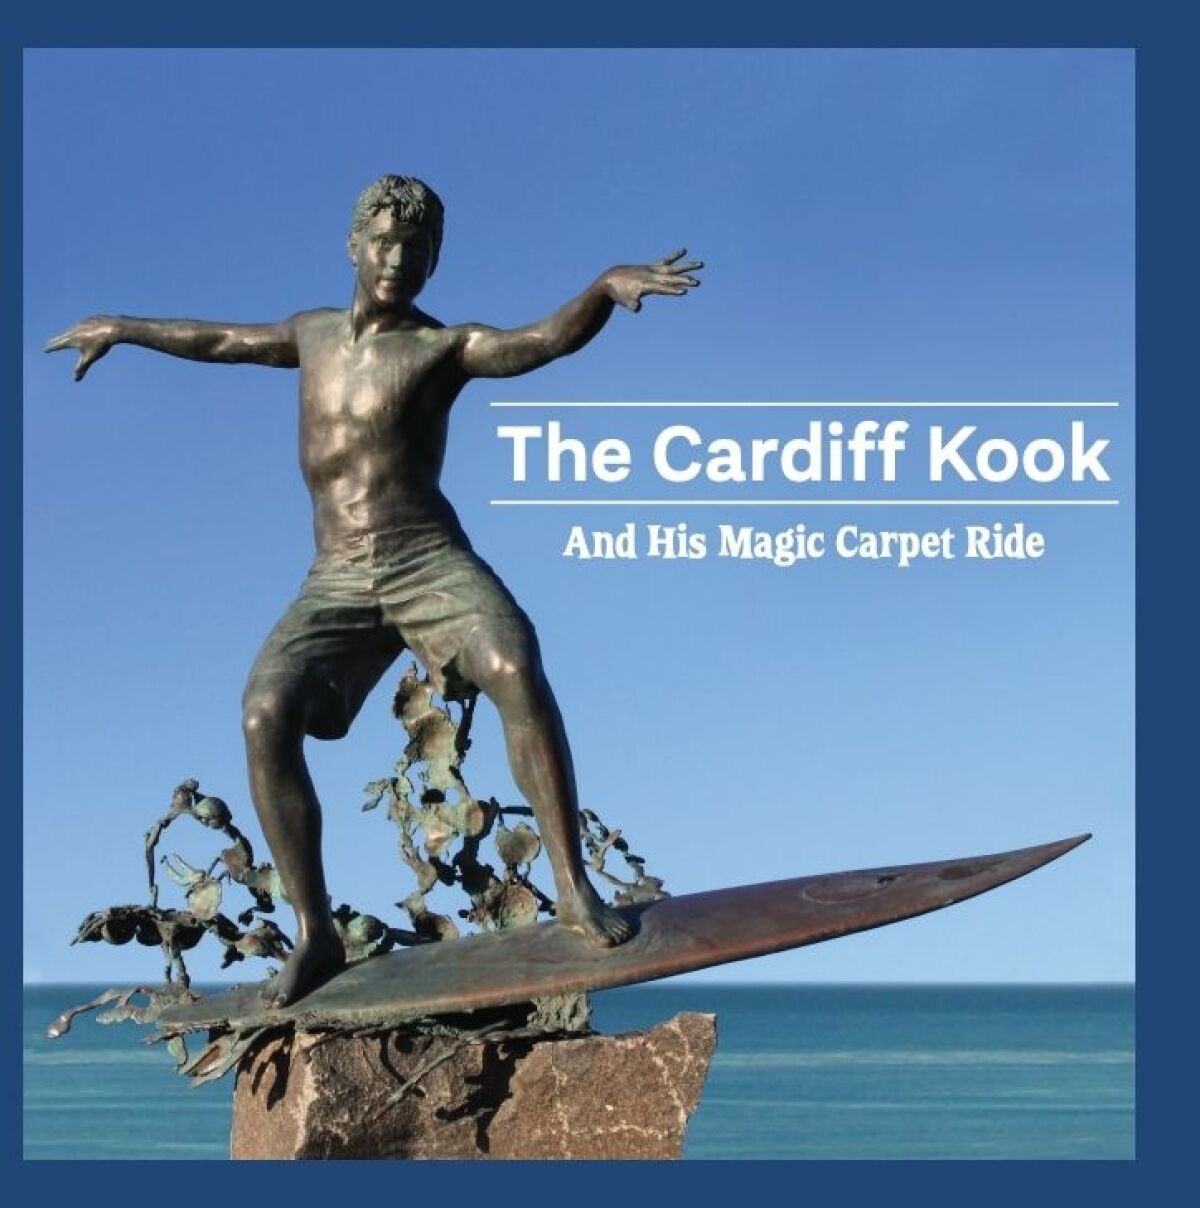 The cover of The Cardiff Kook and His Magic Carpet Ride